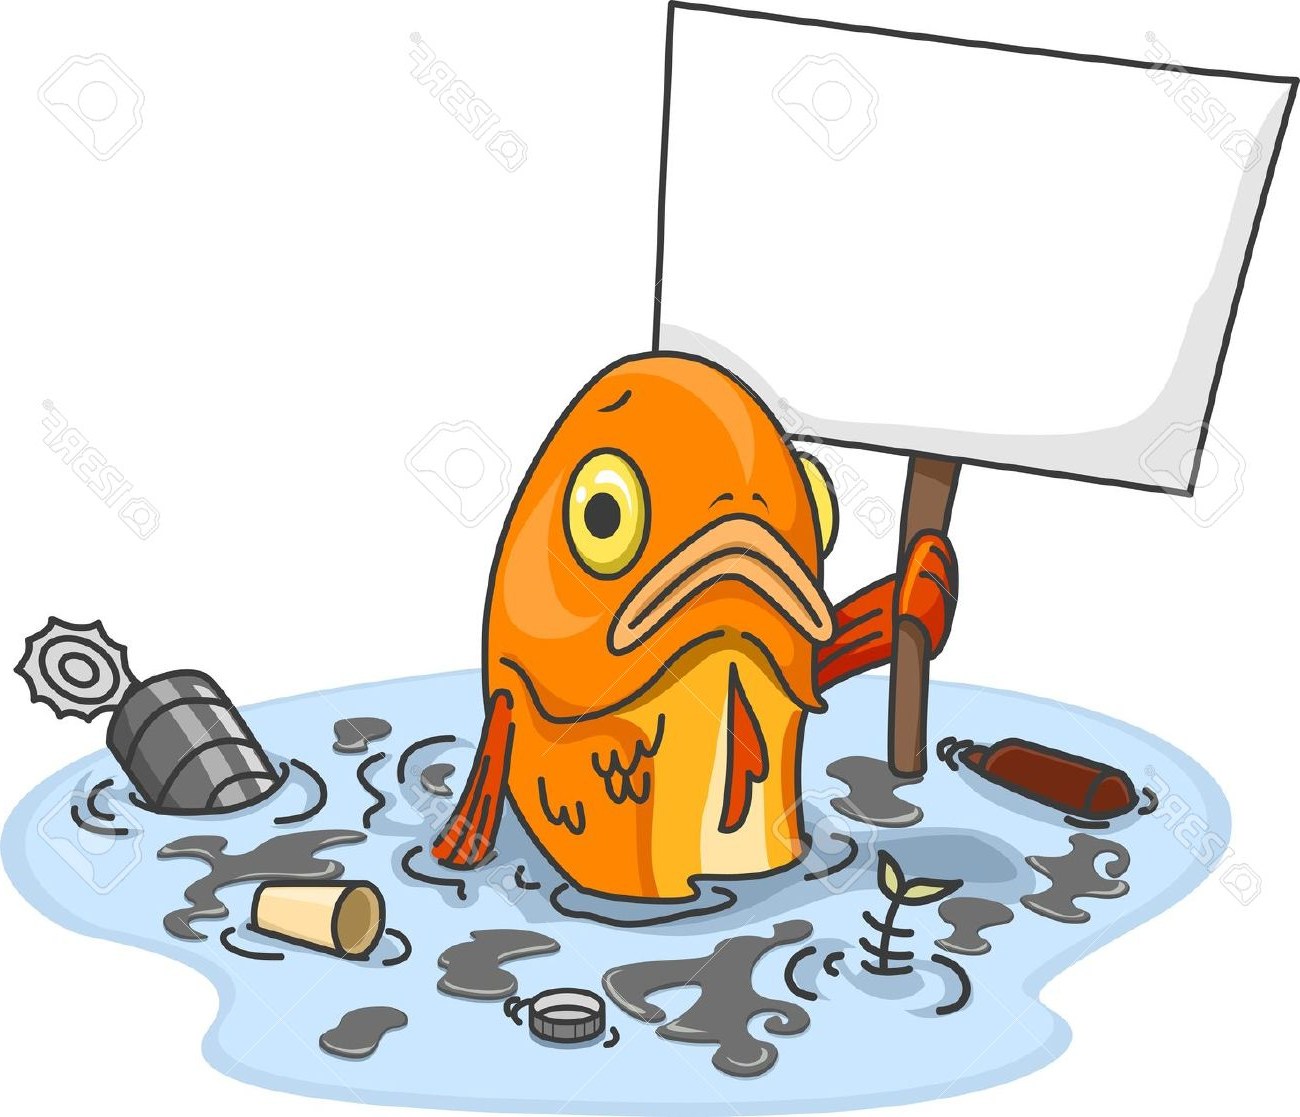 Pollution clipart water conservation, Pollution water conservation